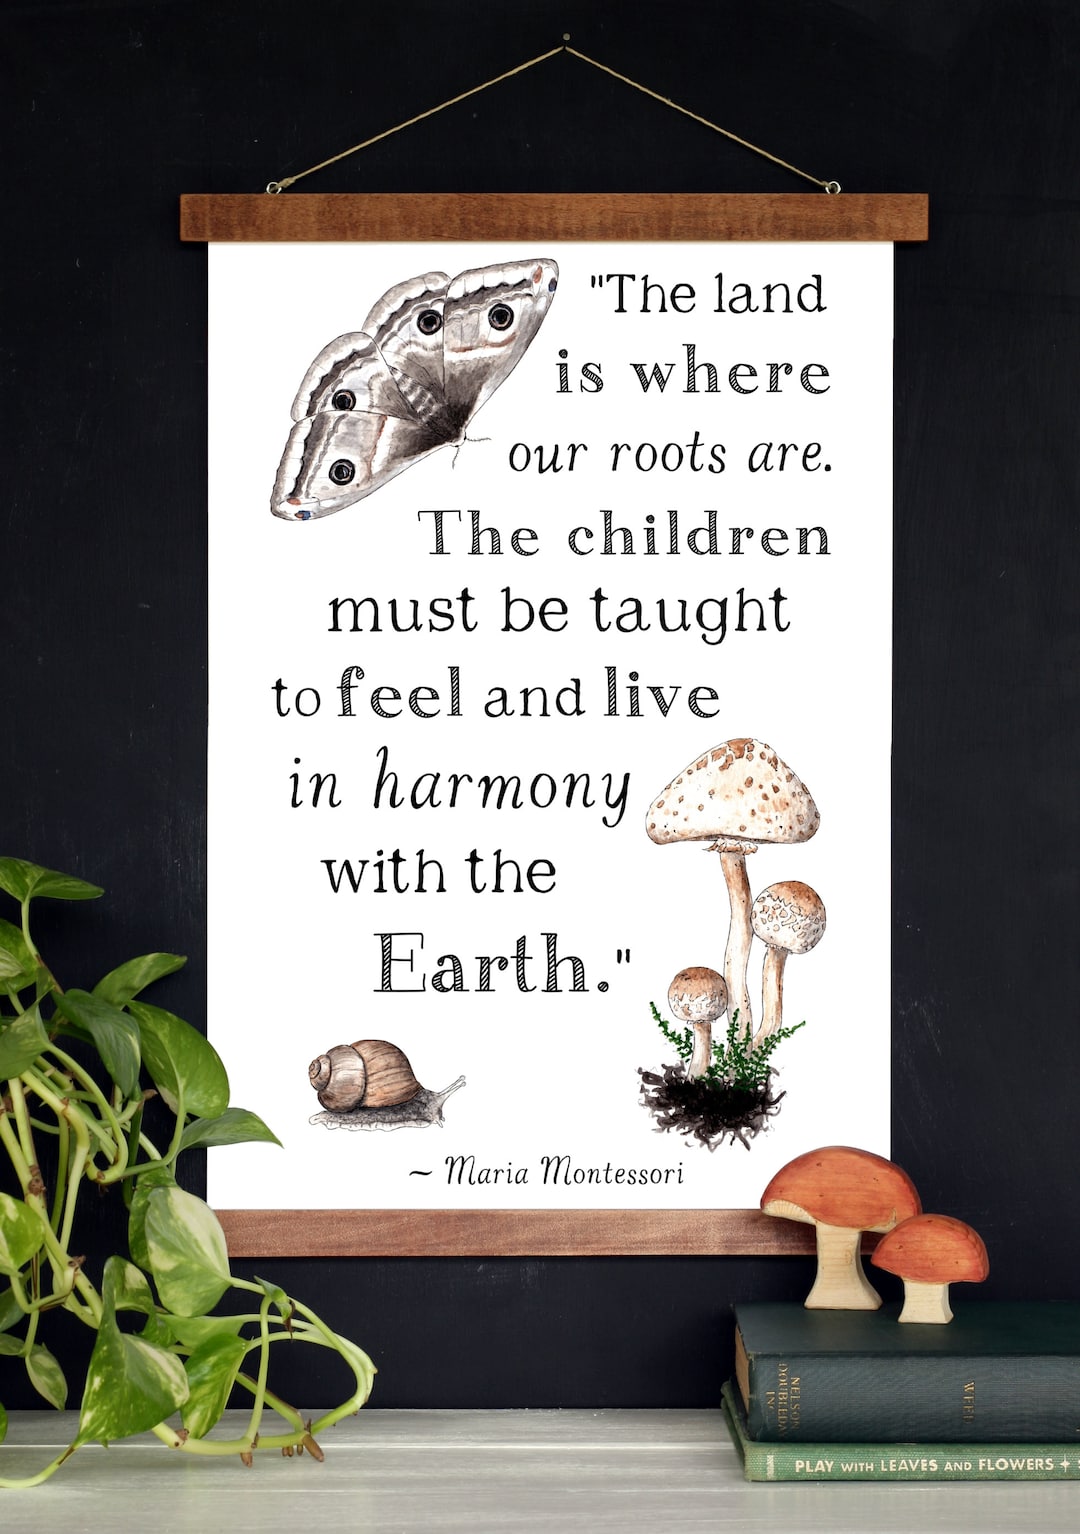 MARIA MONTESSORI QUOTE Development is a Series of Rebirths Poster for Sale  by TeyMank